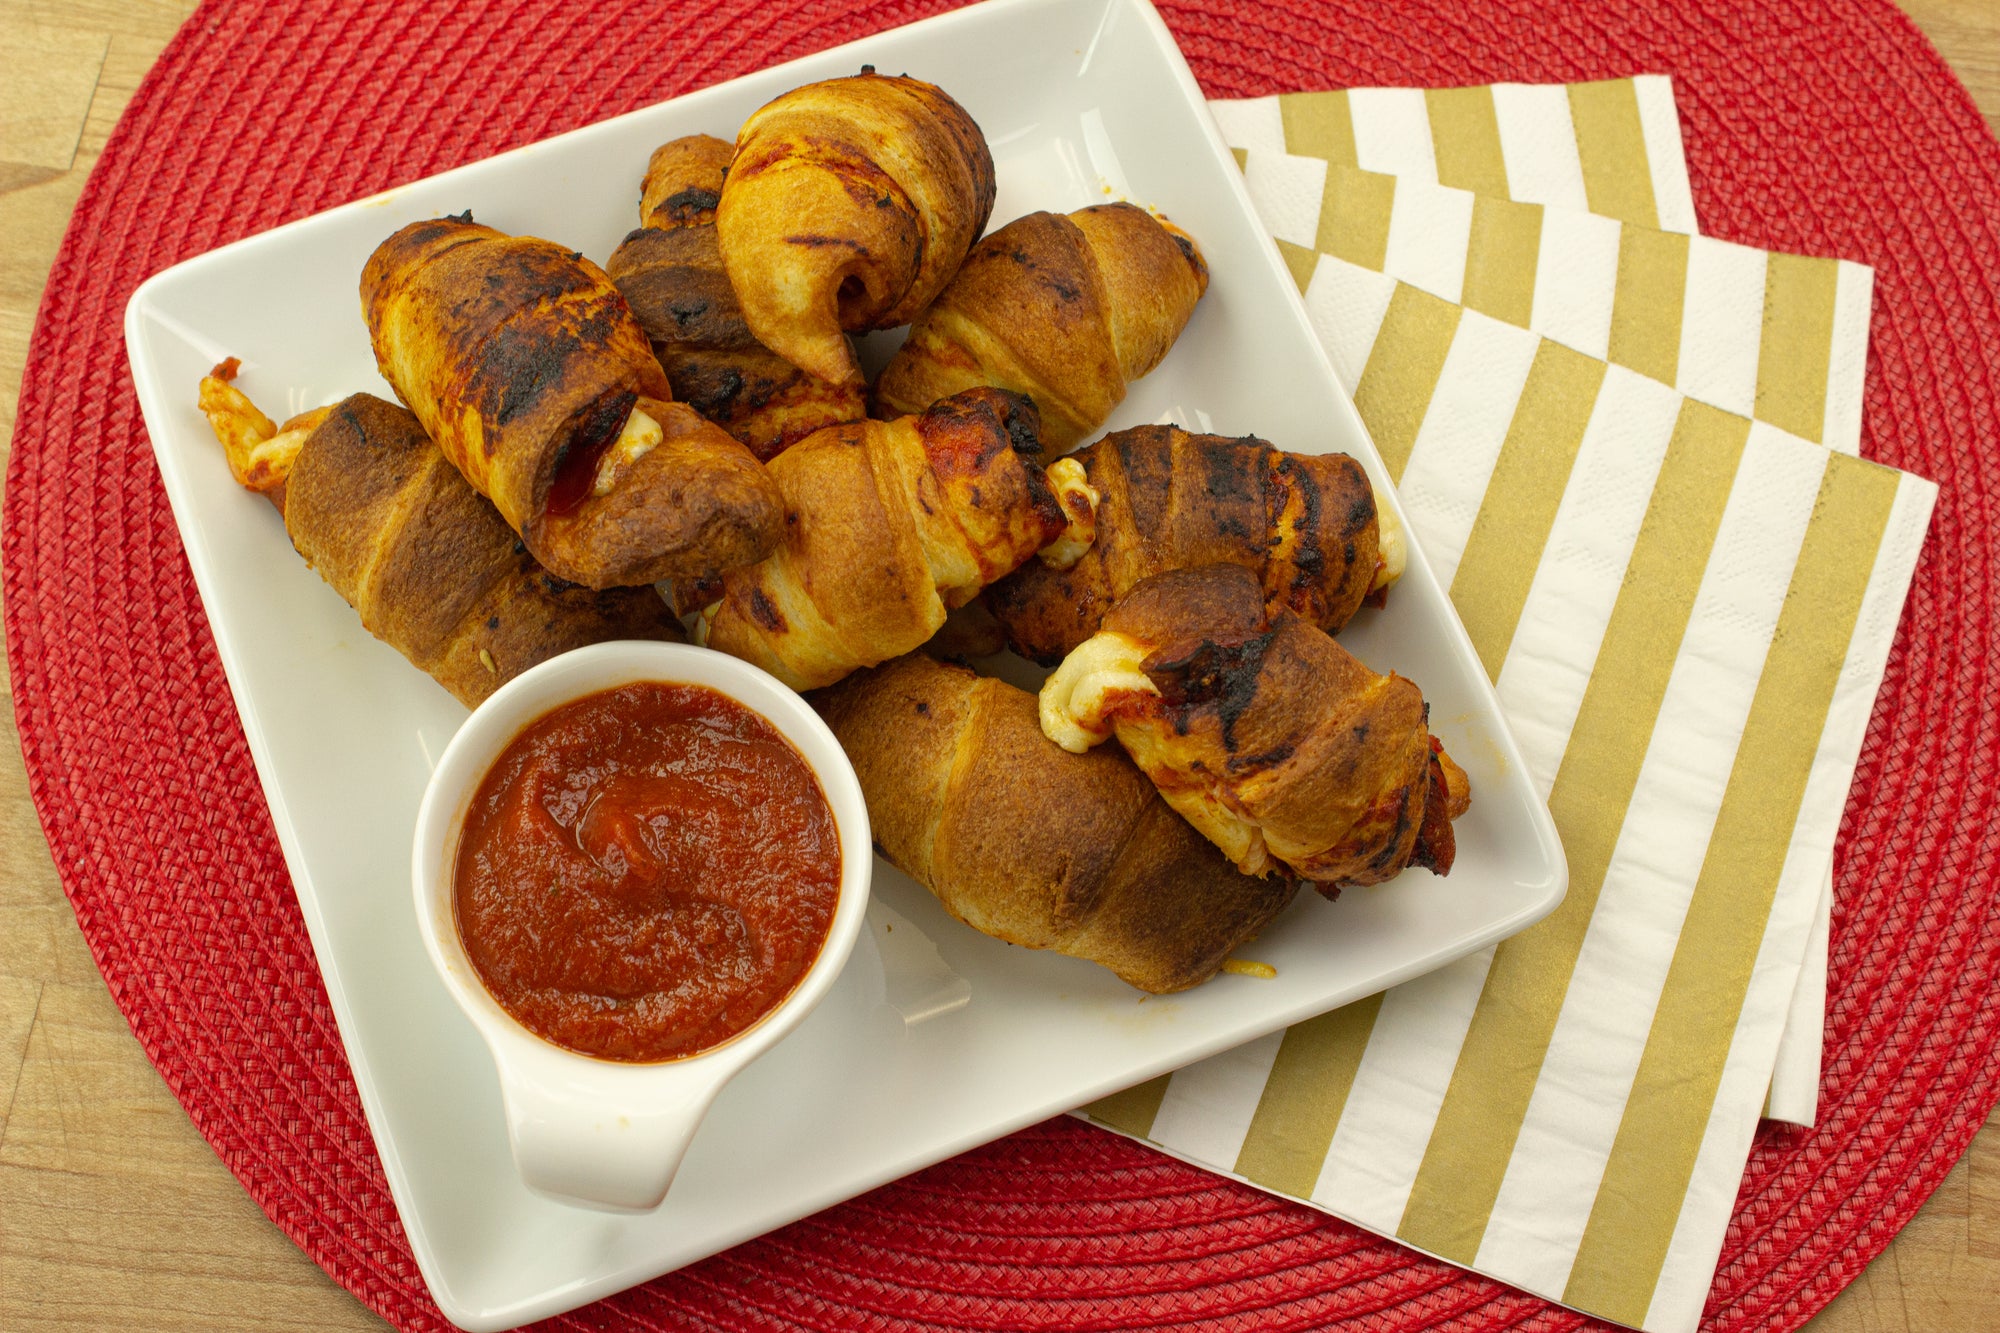 Pizza Rollup Snackers